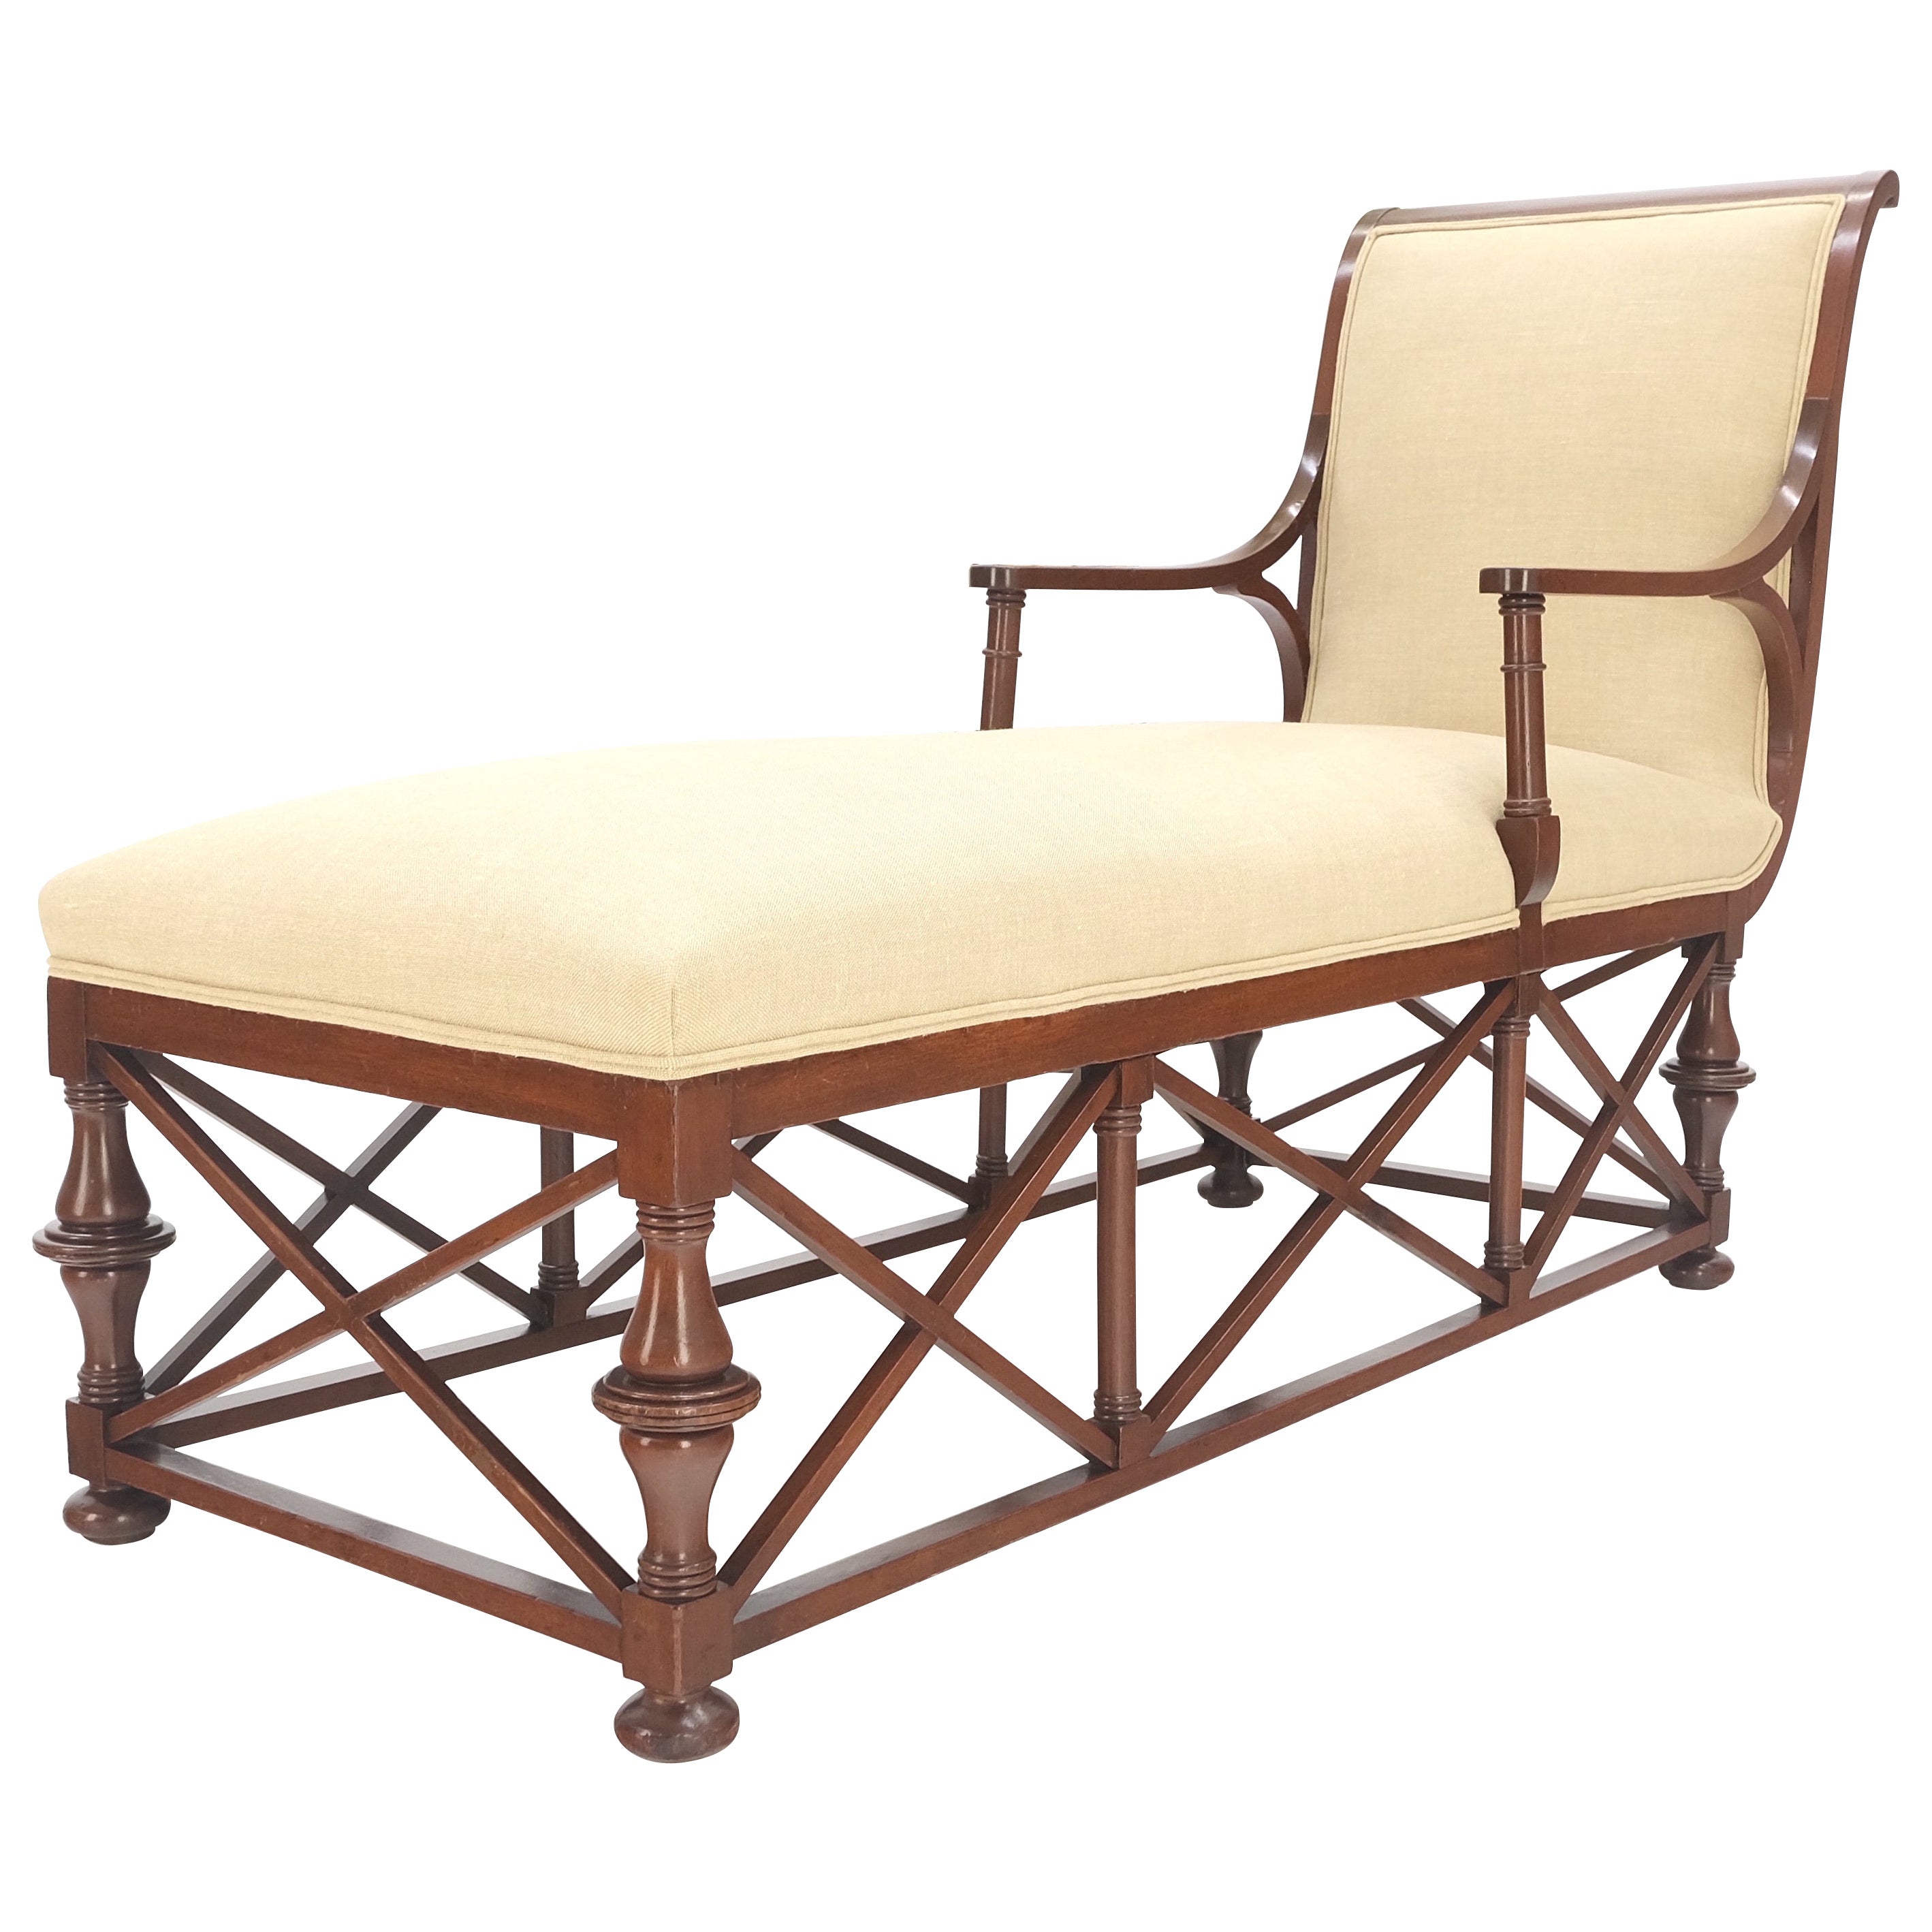 New Linen Upholstery Carved Mahogany Federal Style Chaise Lounge Chair MINT! For Sale